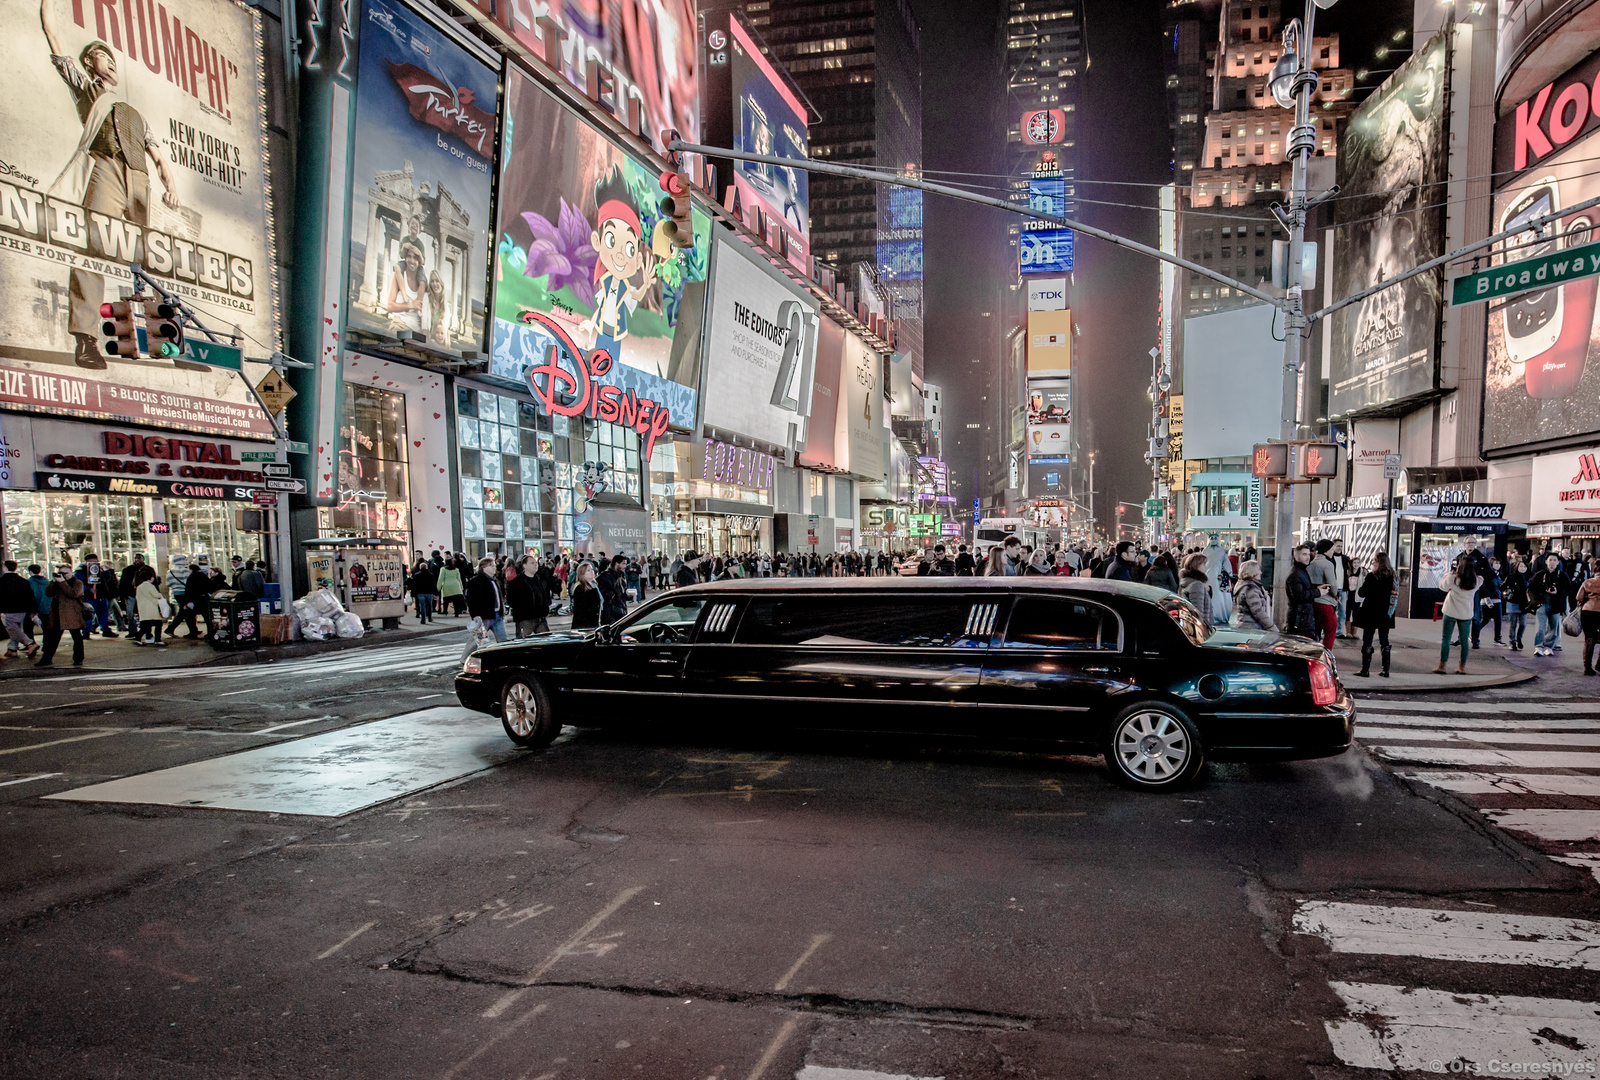 ors.cseresnyes: Limo